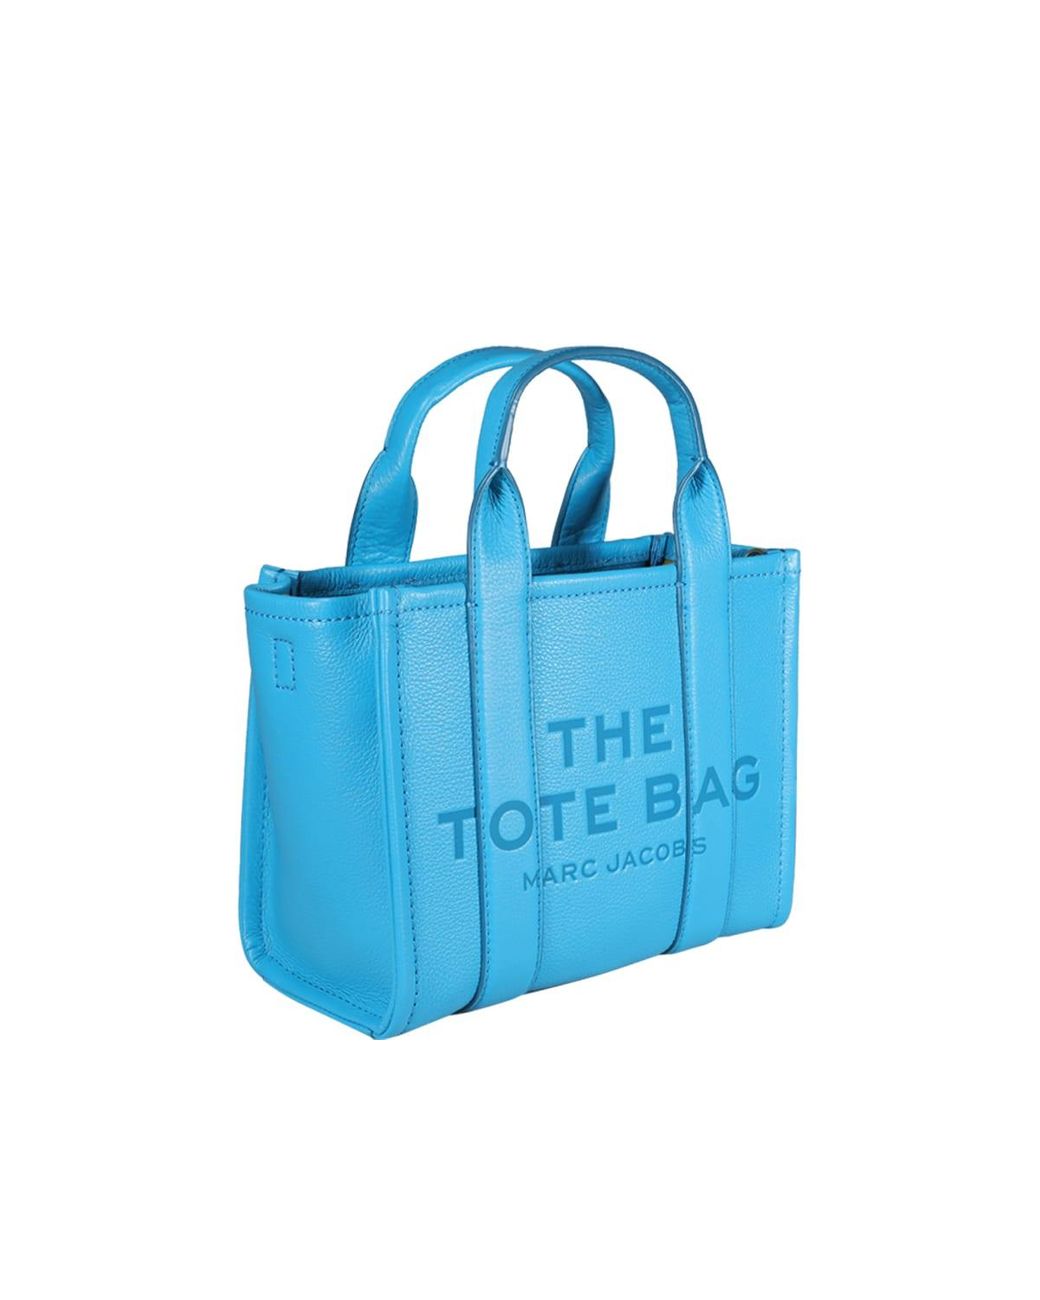 Marc Jacobs The Mini Tote Bag in Blue